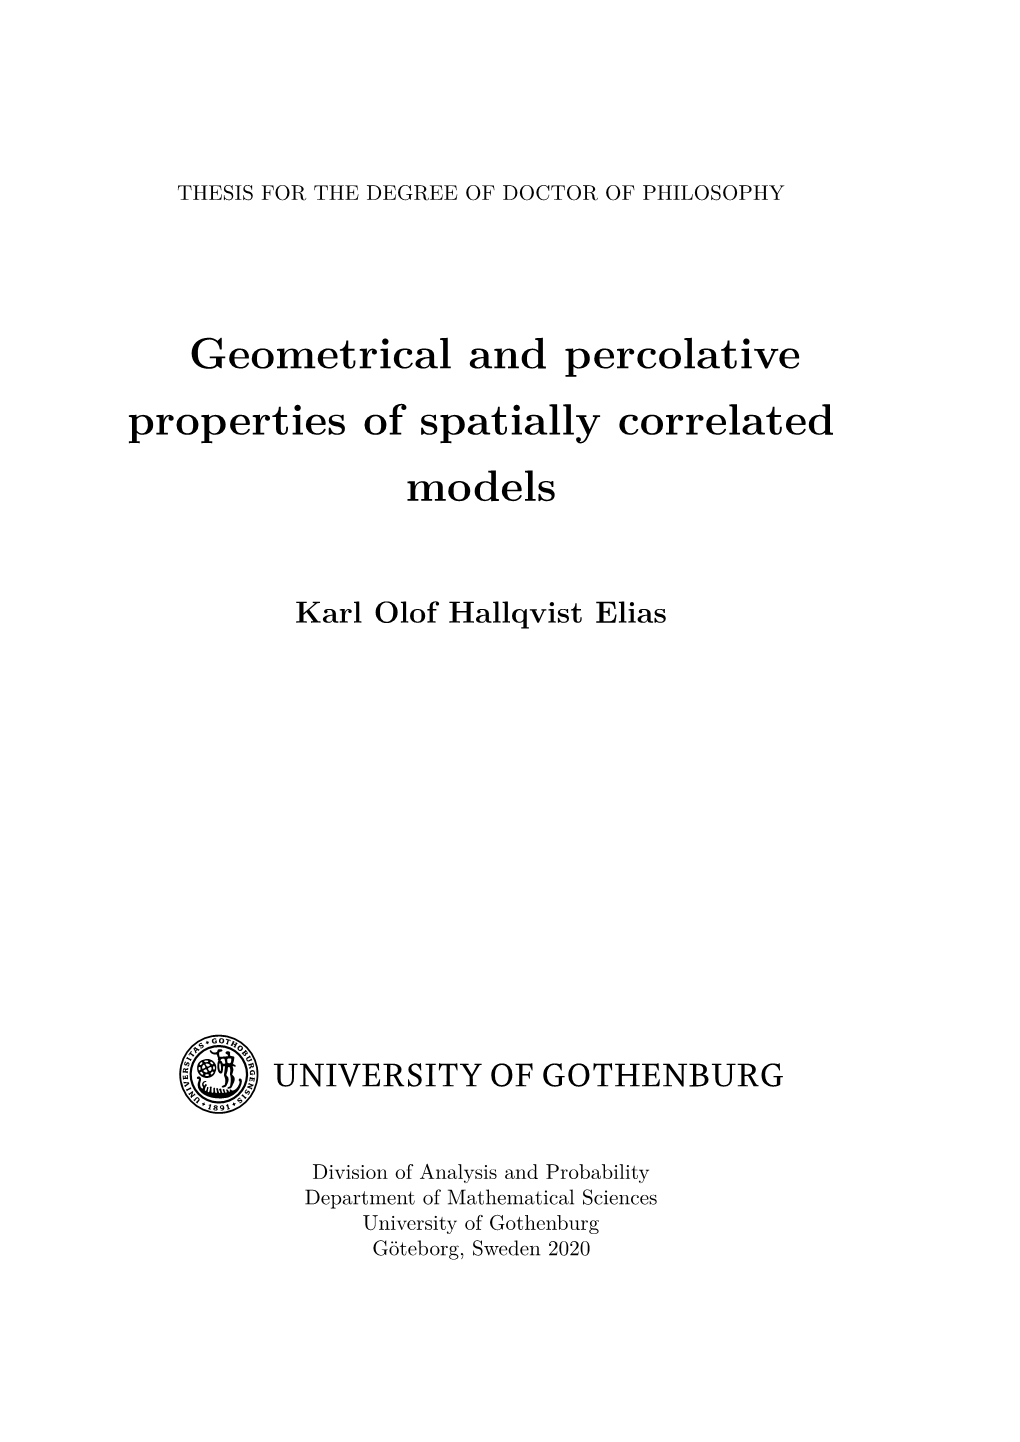 Geometrical and Percolative Properties of Spatially Correlated Models